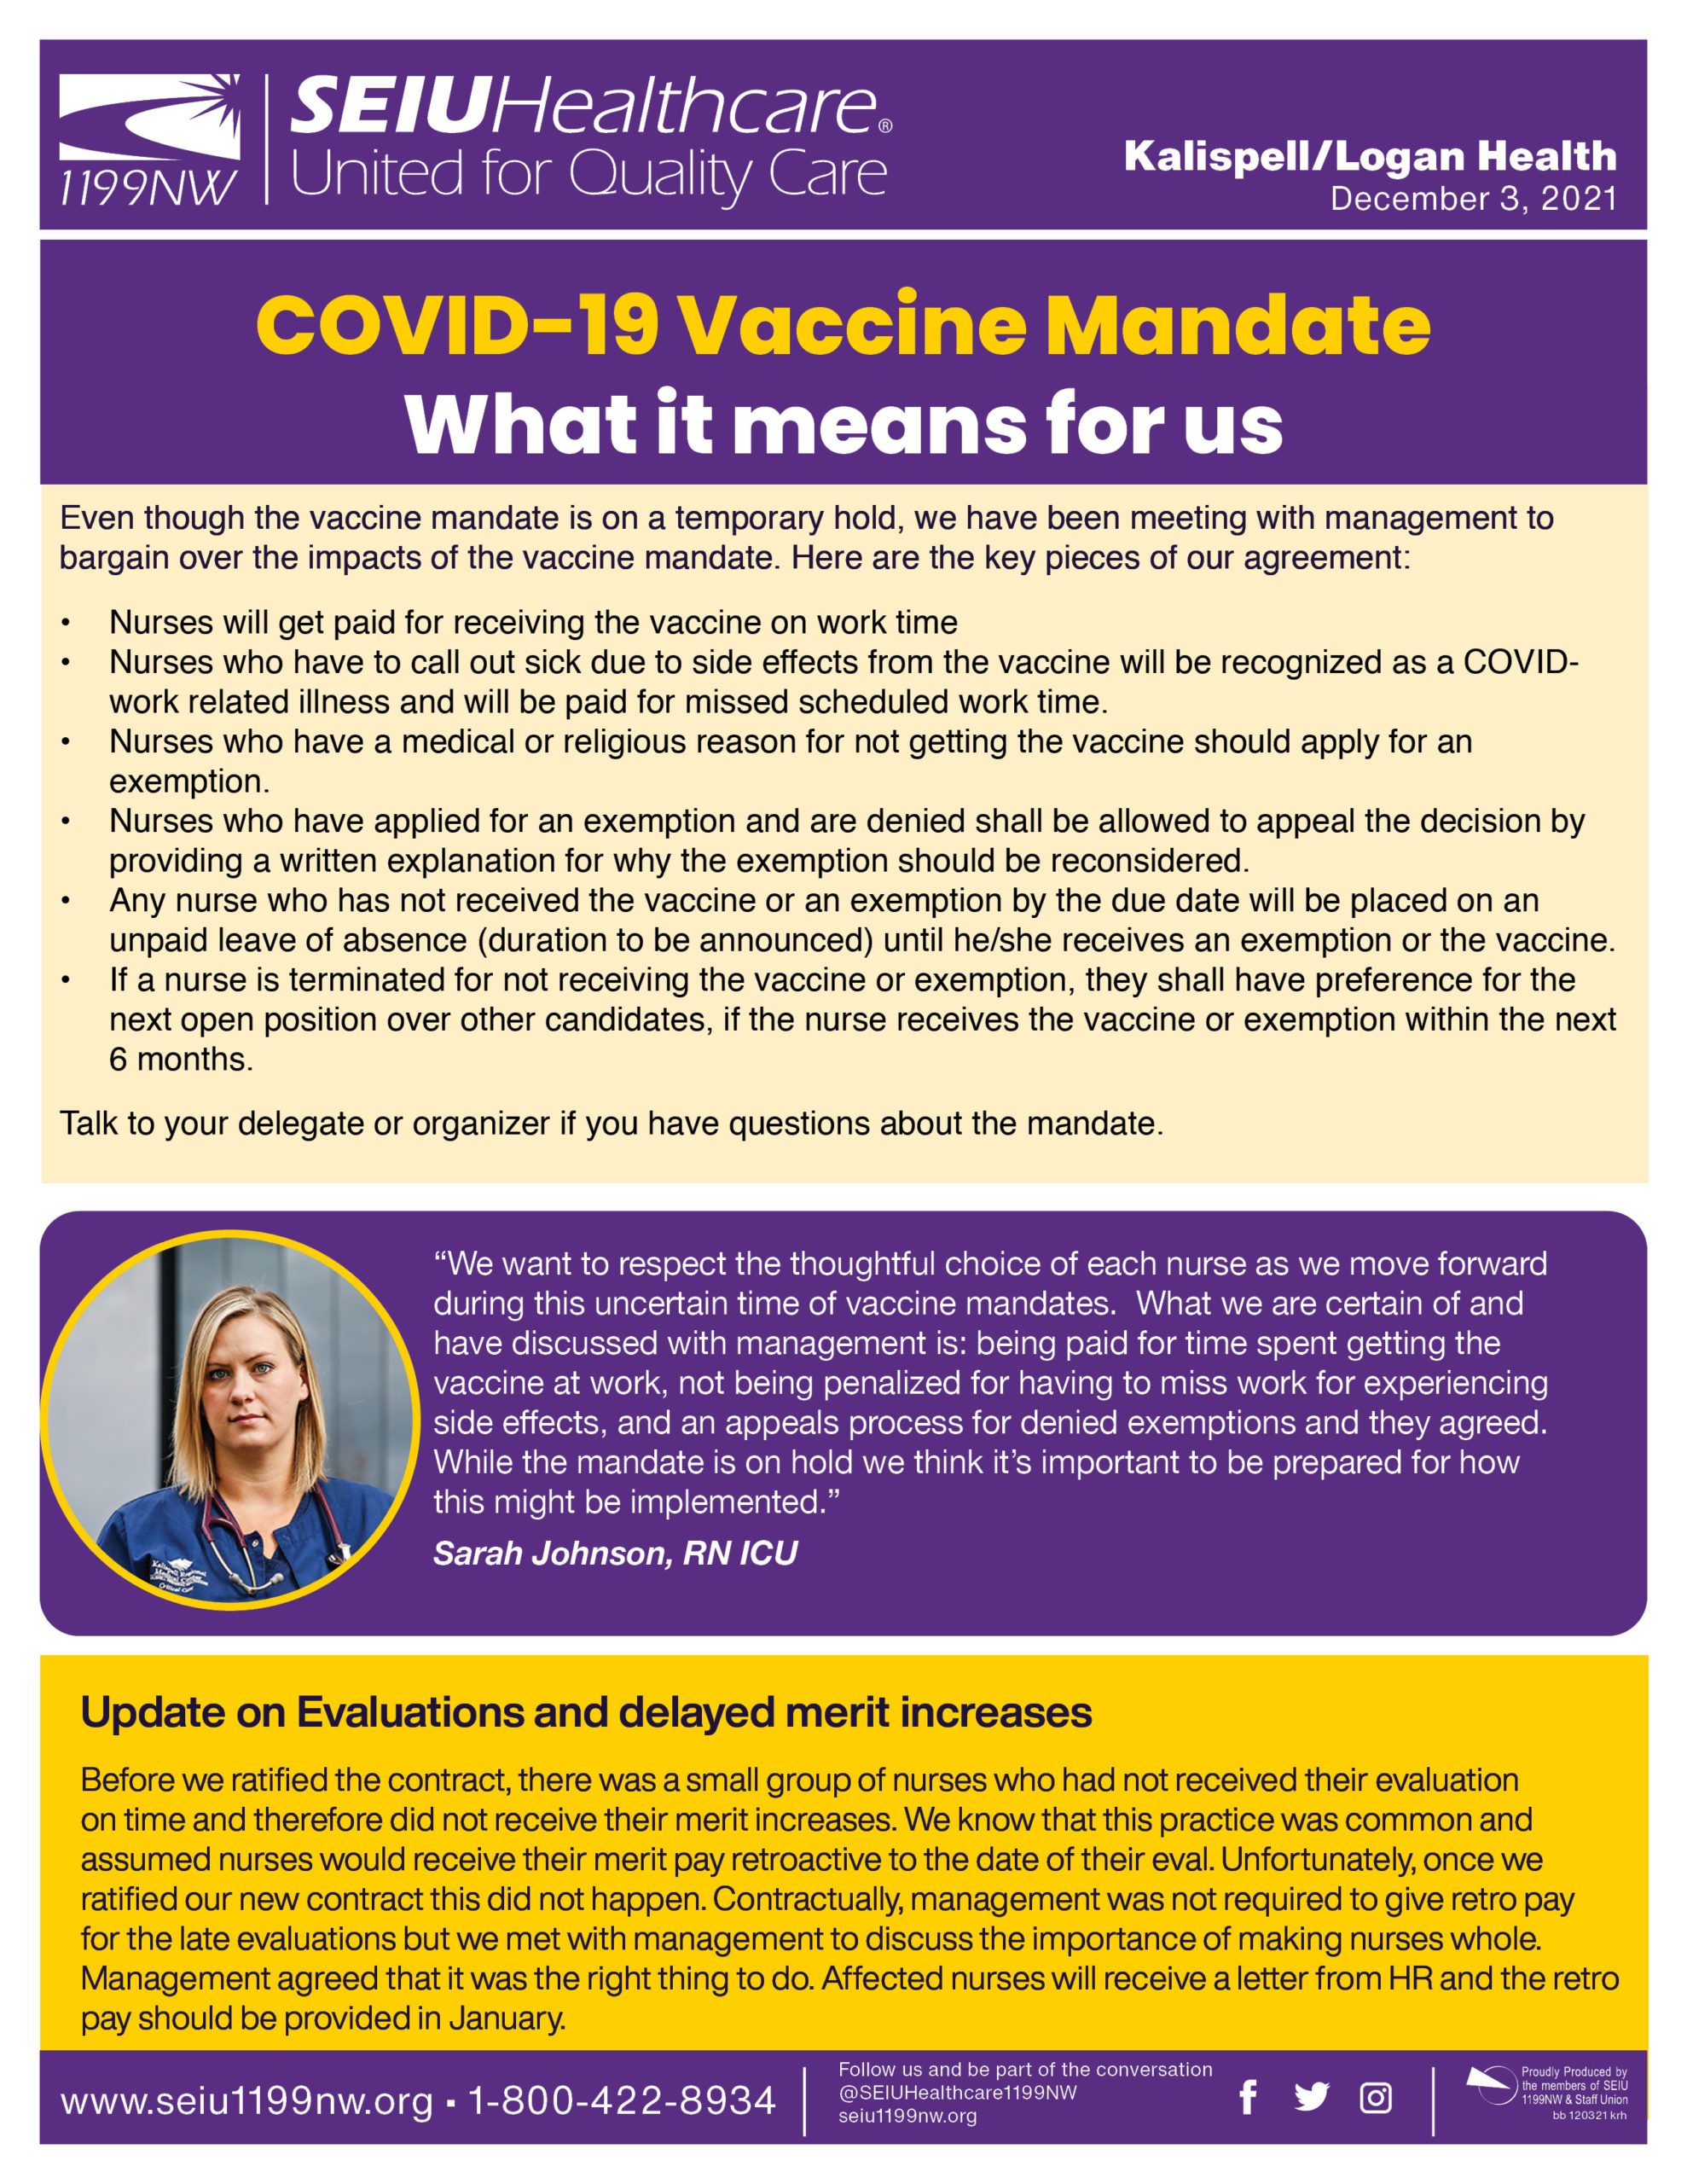 COVID-19 Vaccine Mandate - What it means for us